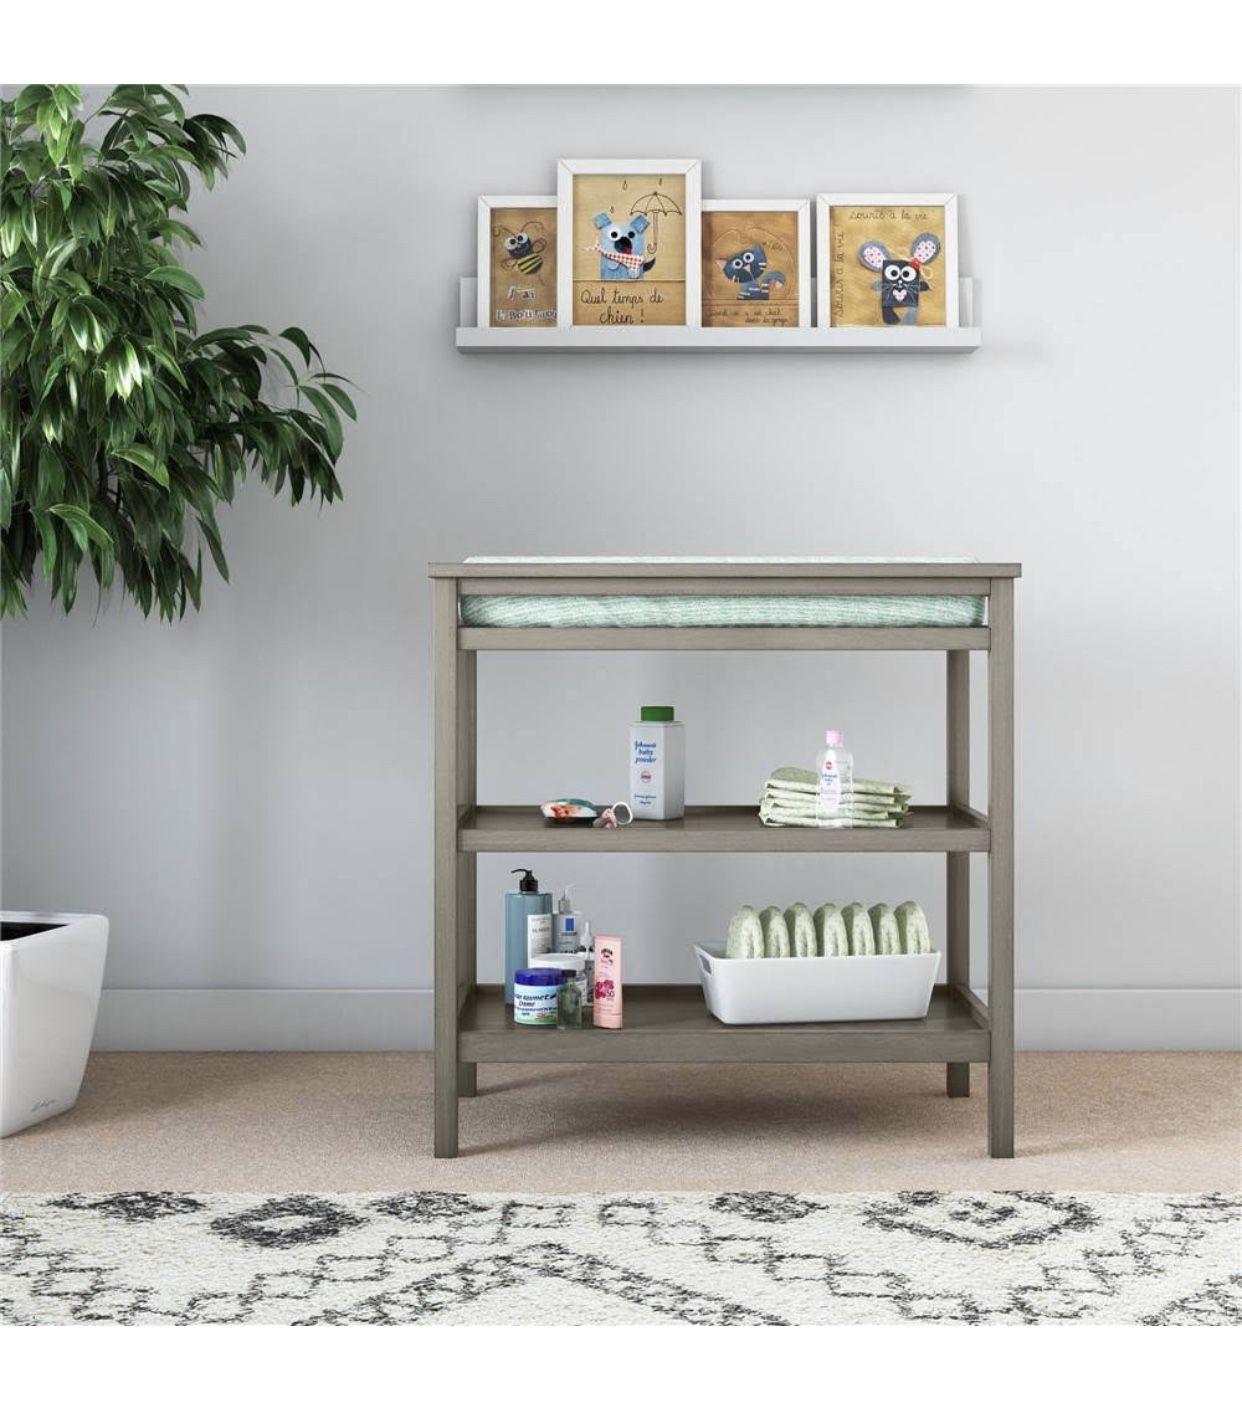 Changing Table - NEW IN BOX!